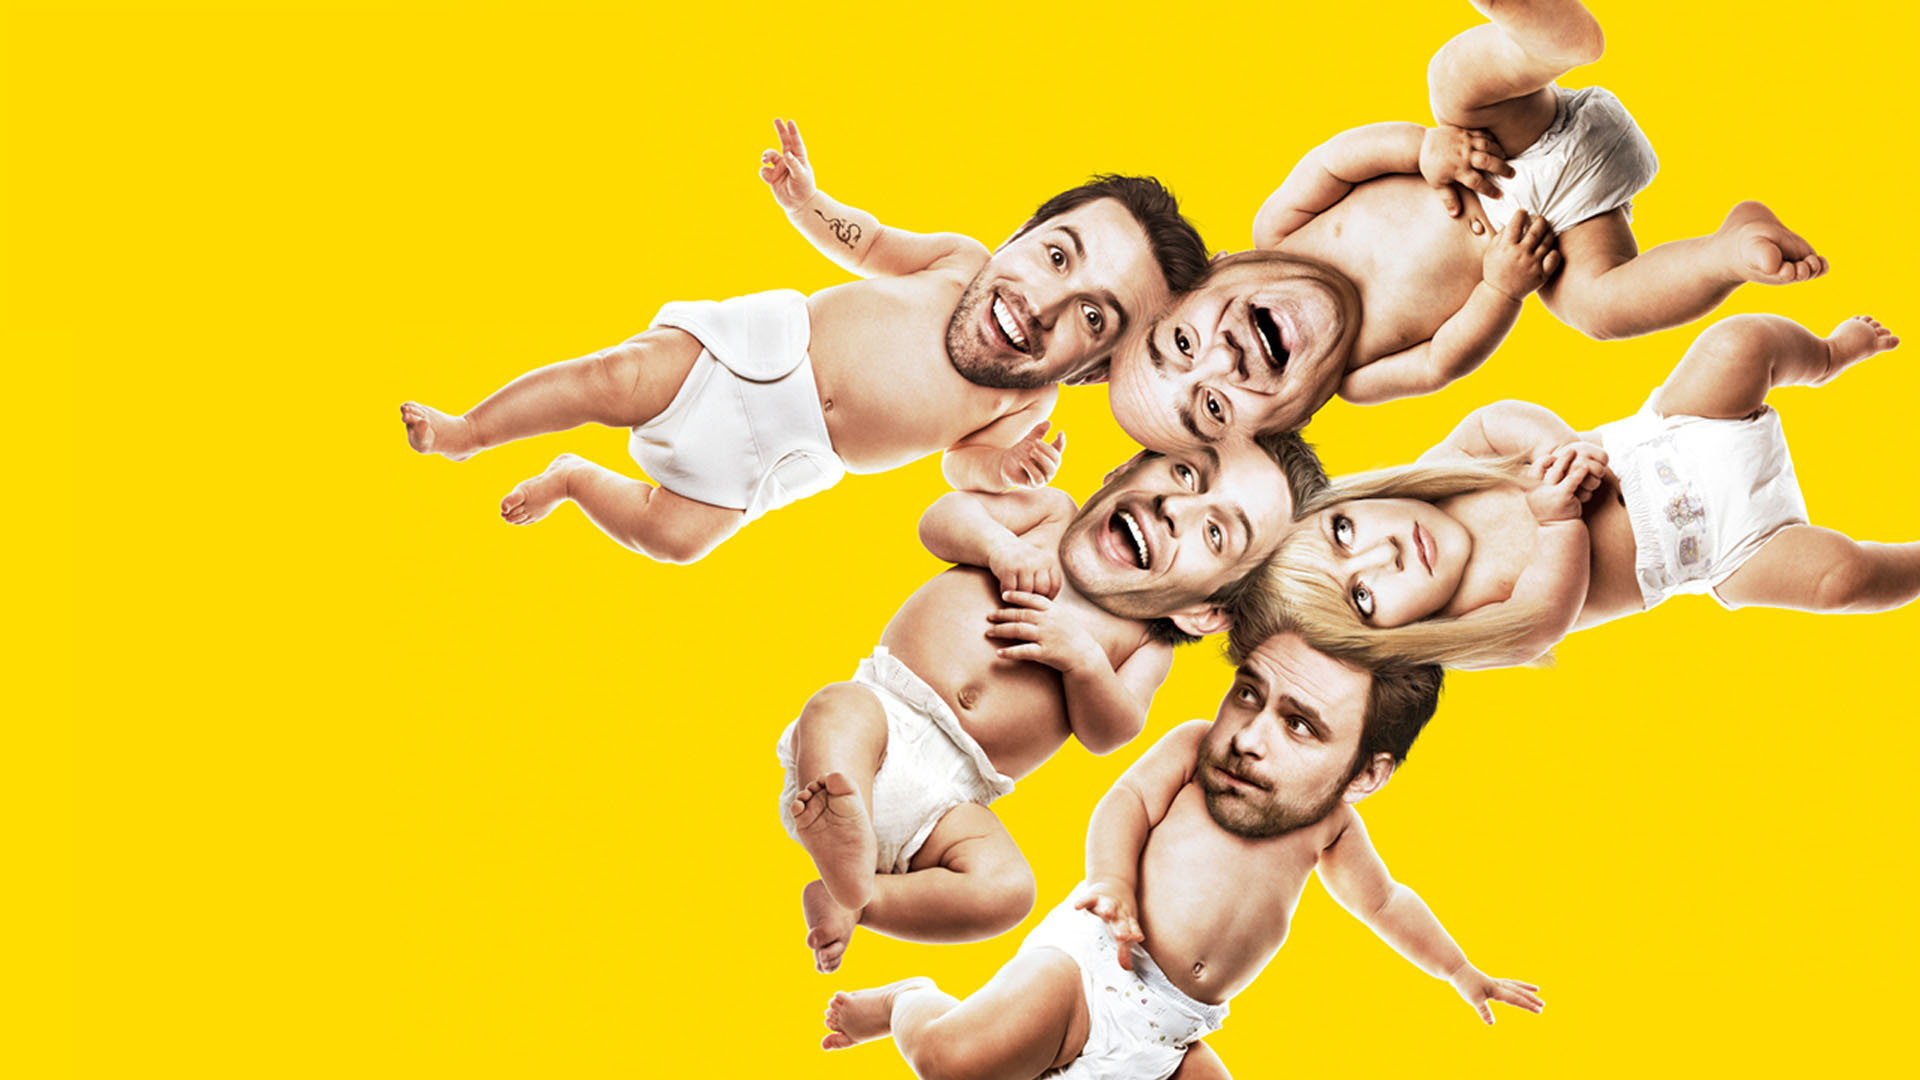 It's Always Sunny in Philadelphia (TV Series): The fifth season, 12 episodes, Concluded airing on December 10, 2009. 1920x1080 Full HD Wallpaper.